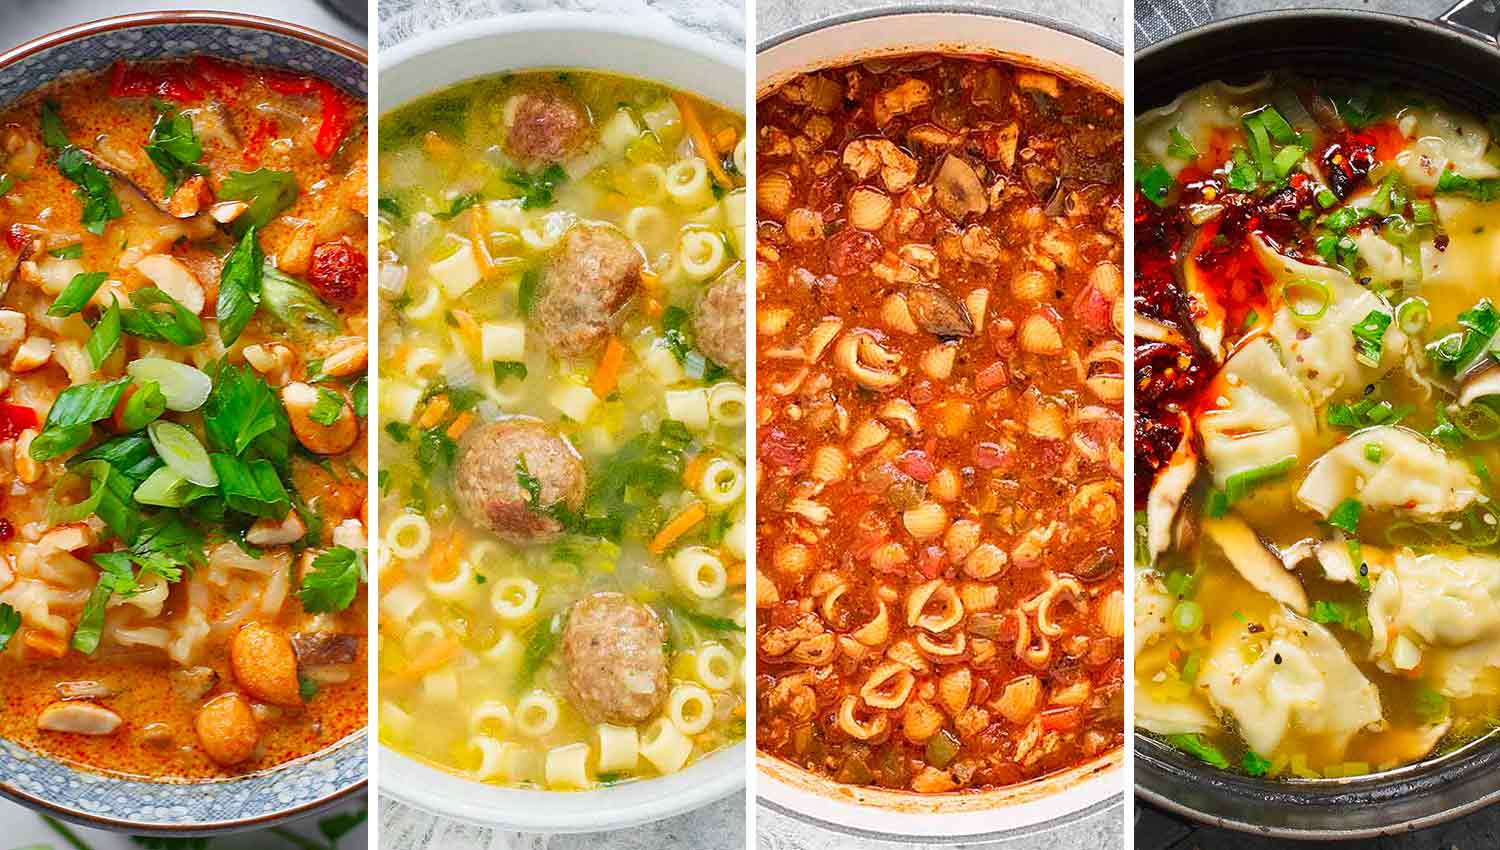 Promo image collage showing 4 soups for the How to Make Great Soup series